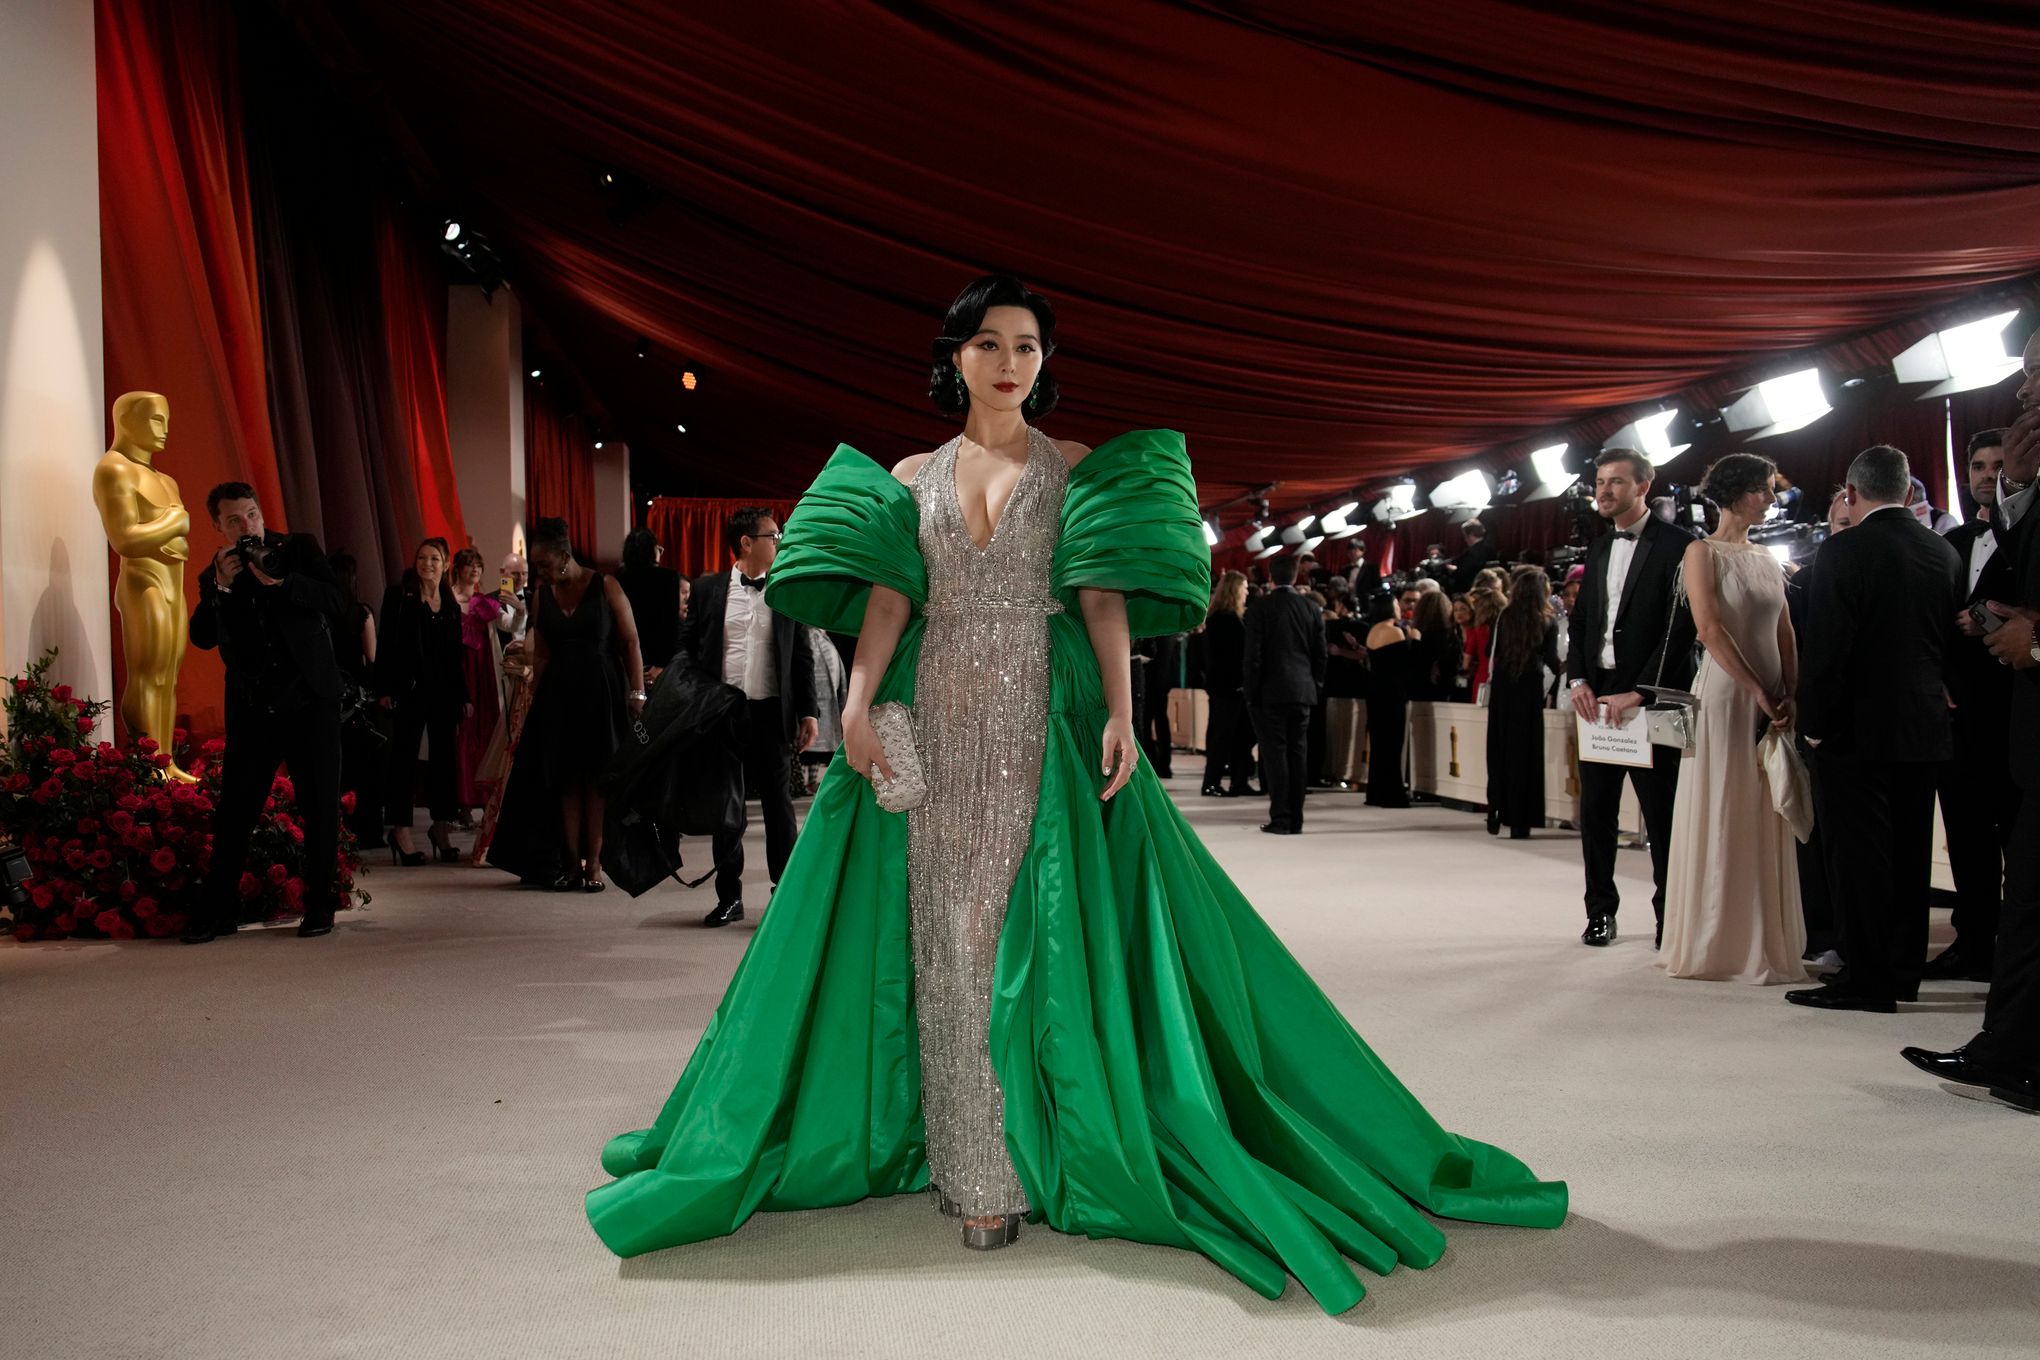 Who wore the most expensive outfit at The Streamer Awards 2023? A look at  popular content creators' attires